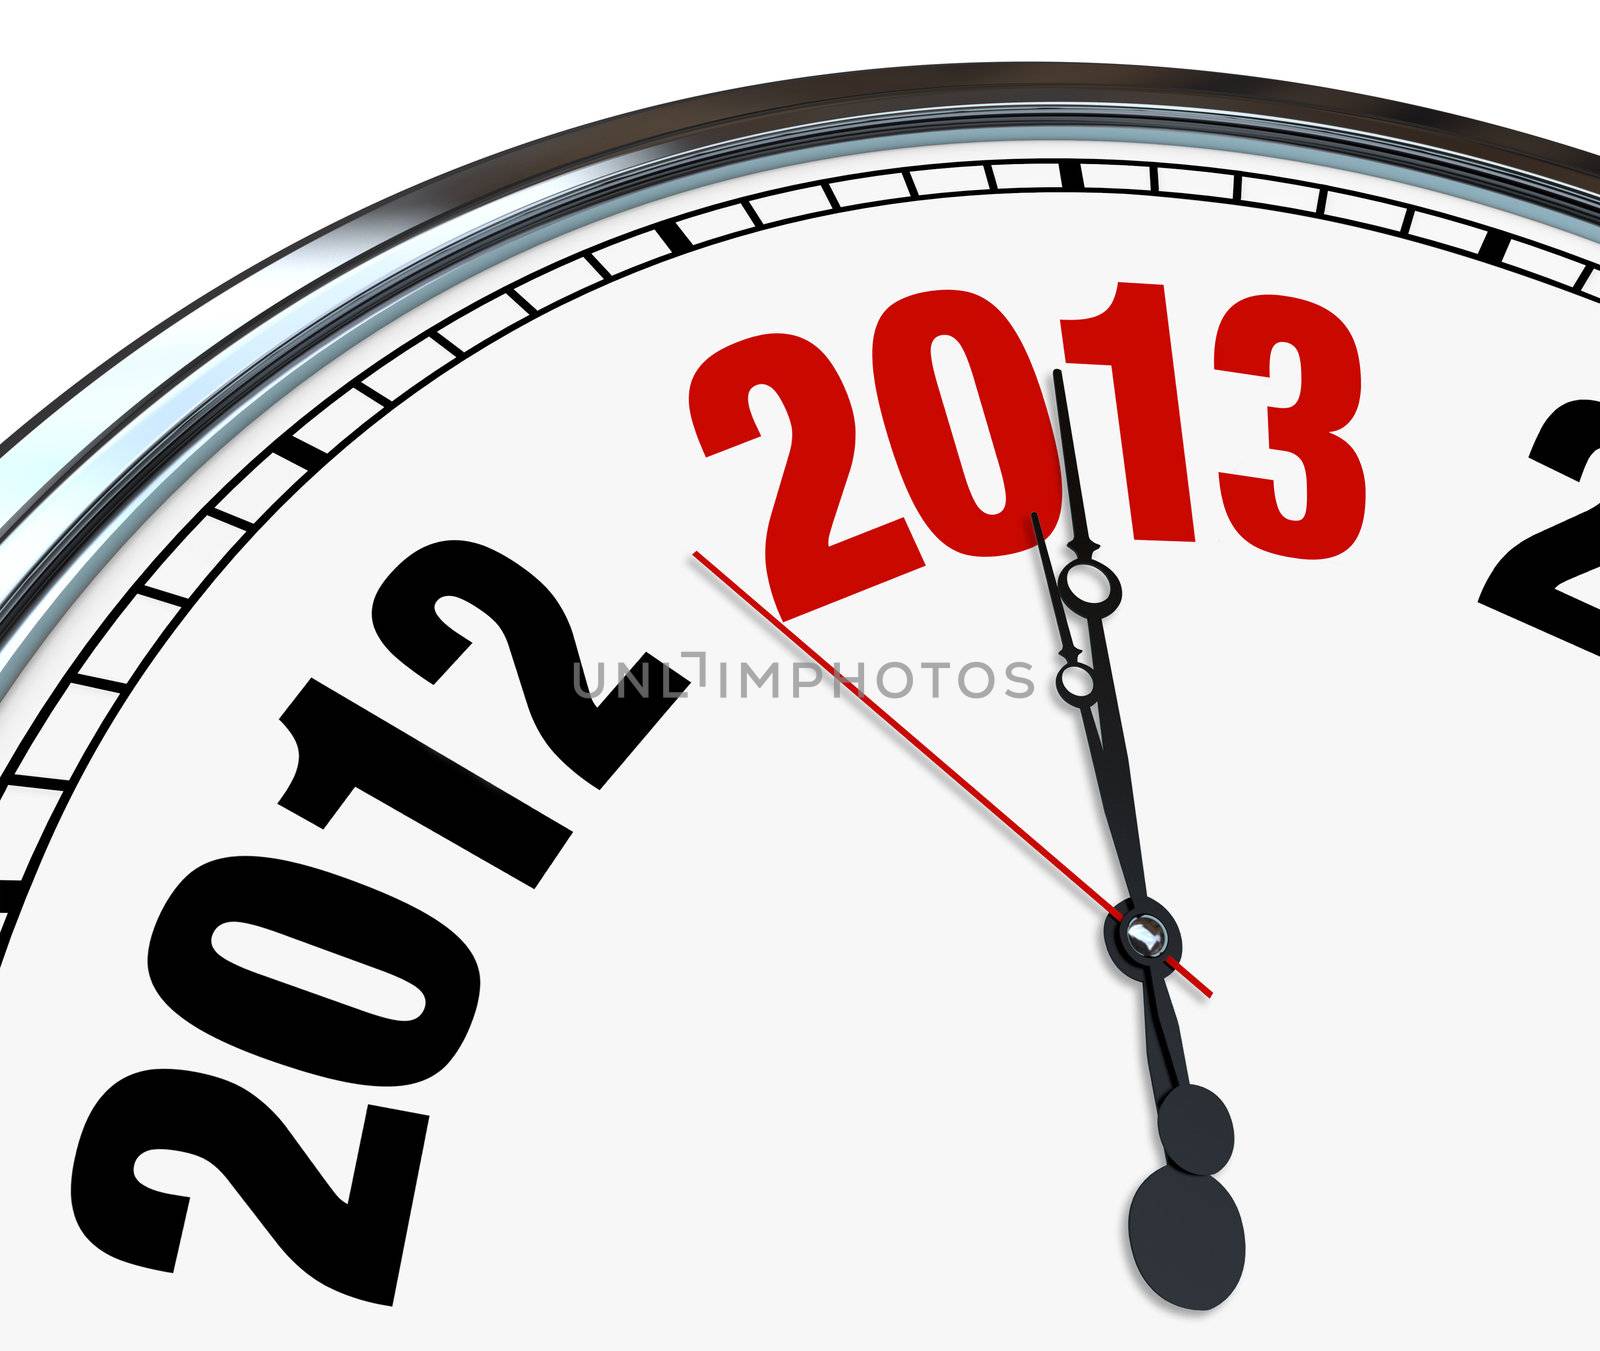 The year 2013 is quickly approaching according to this white clock with hands pointing to the number for the new year